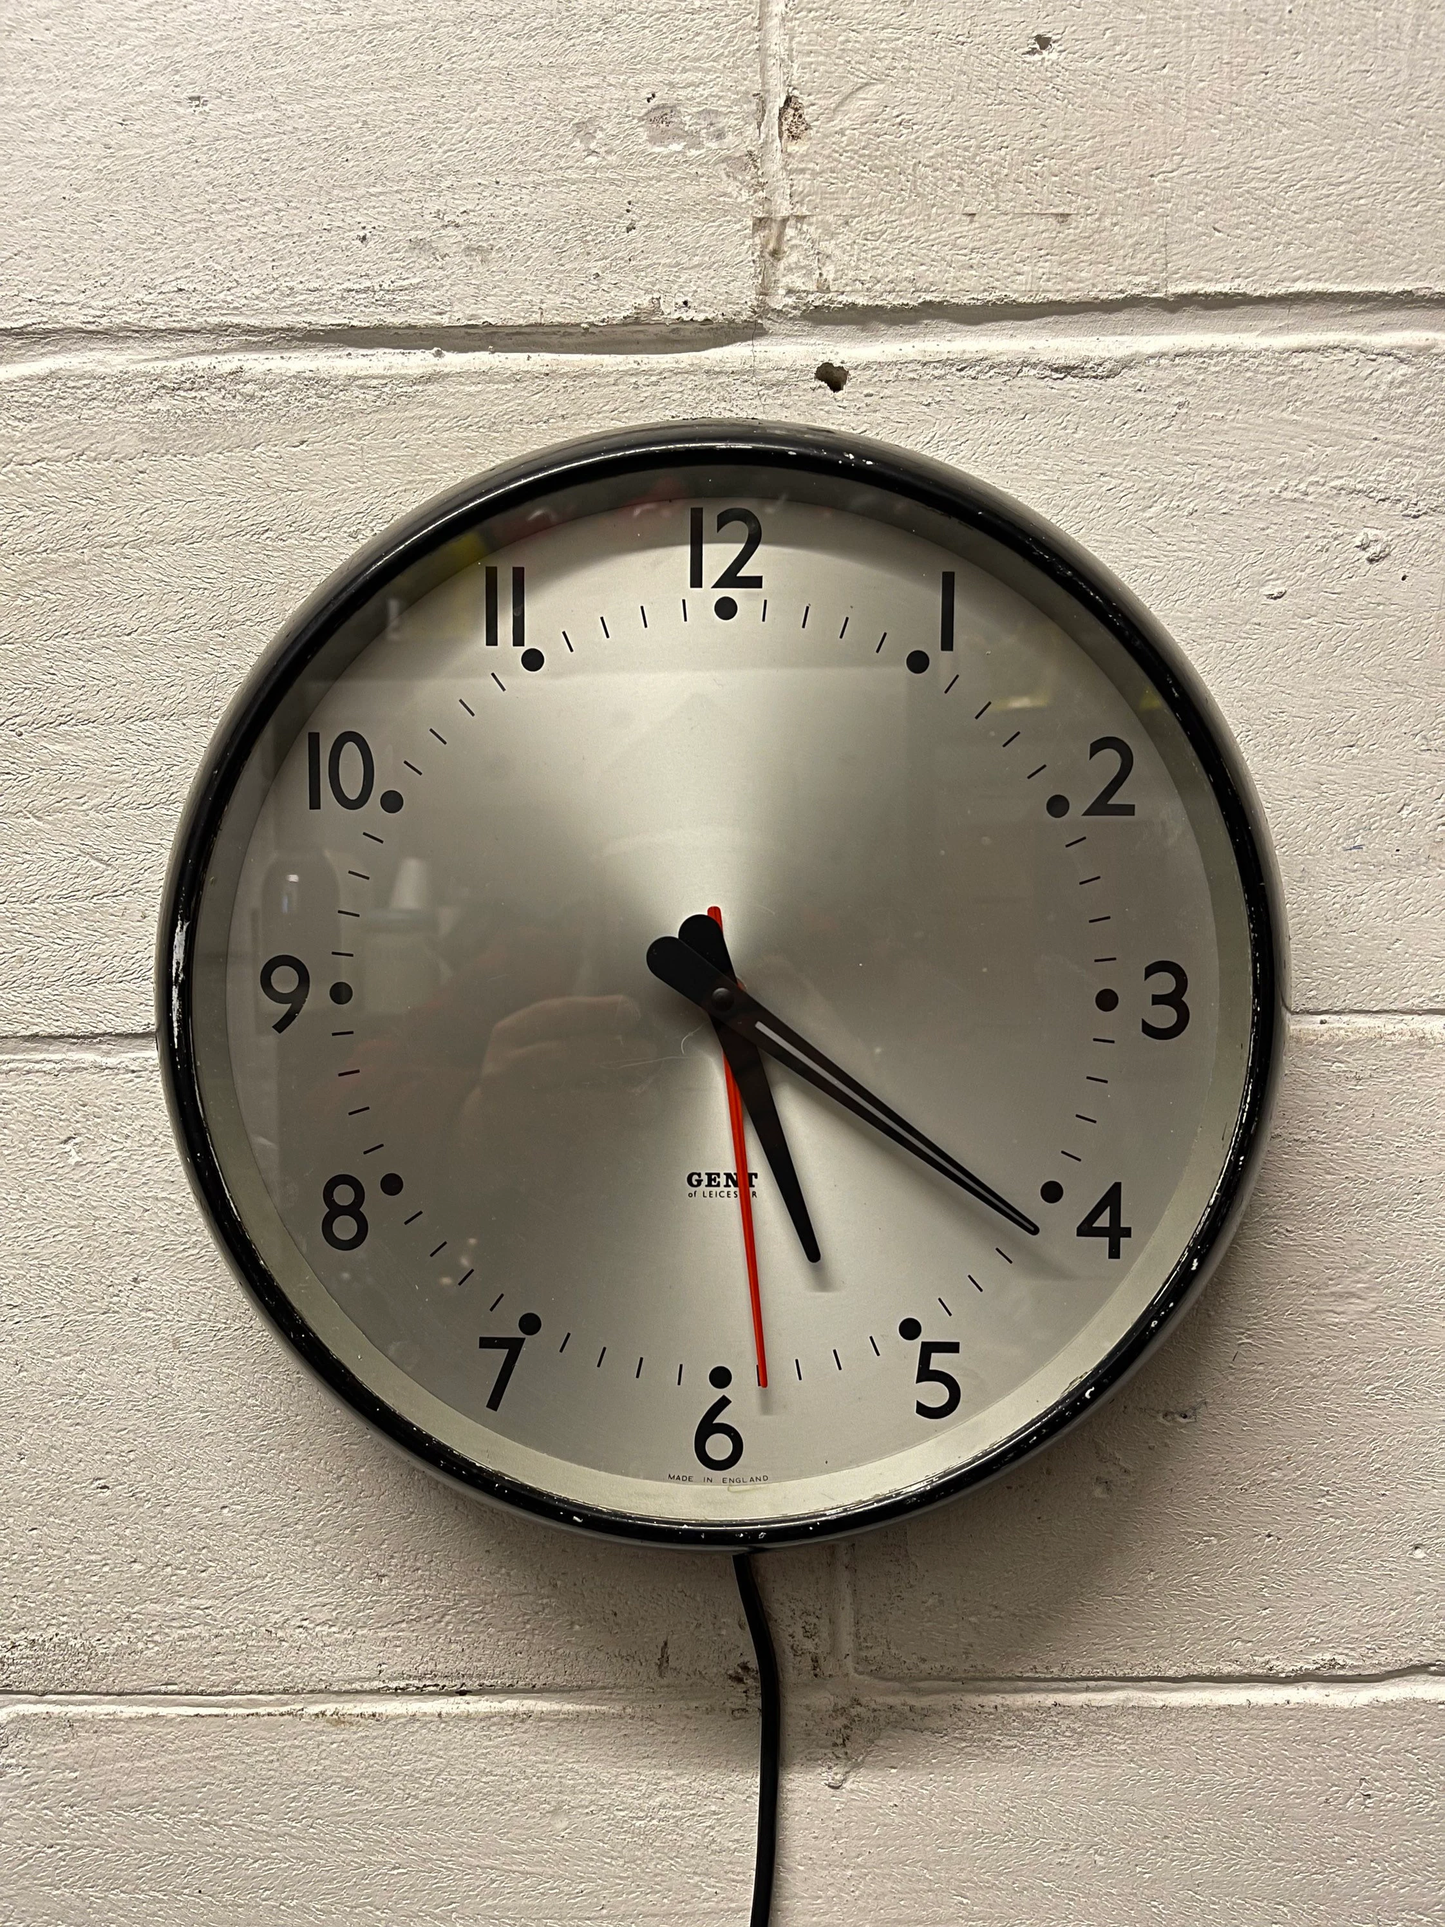 1960s GENTS Of Leicester Electric Factory Clock